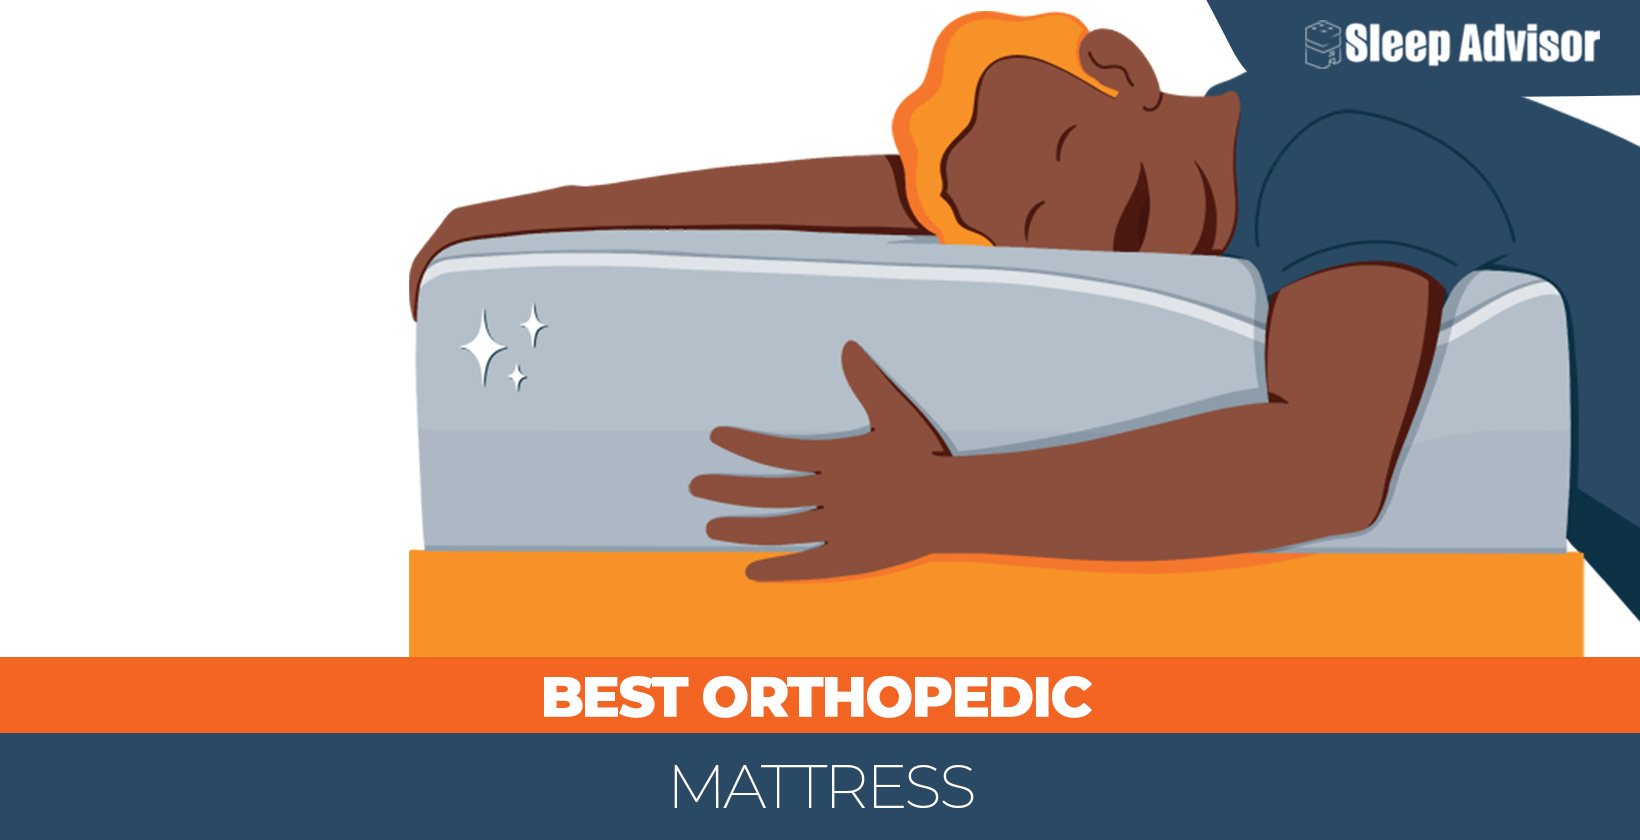 Our in depth best orthopedic mattress